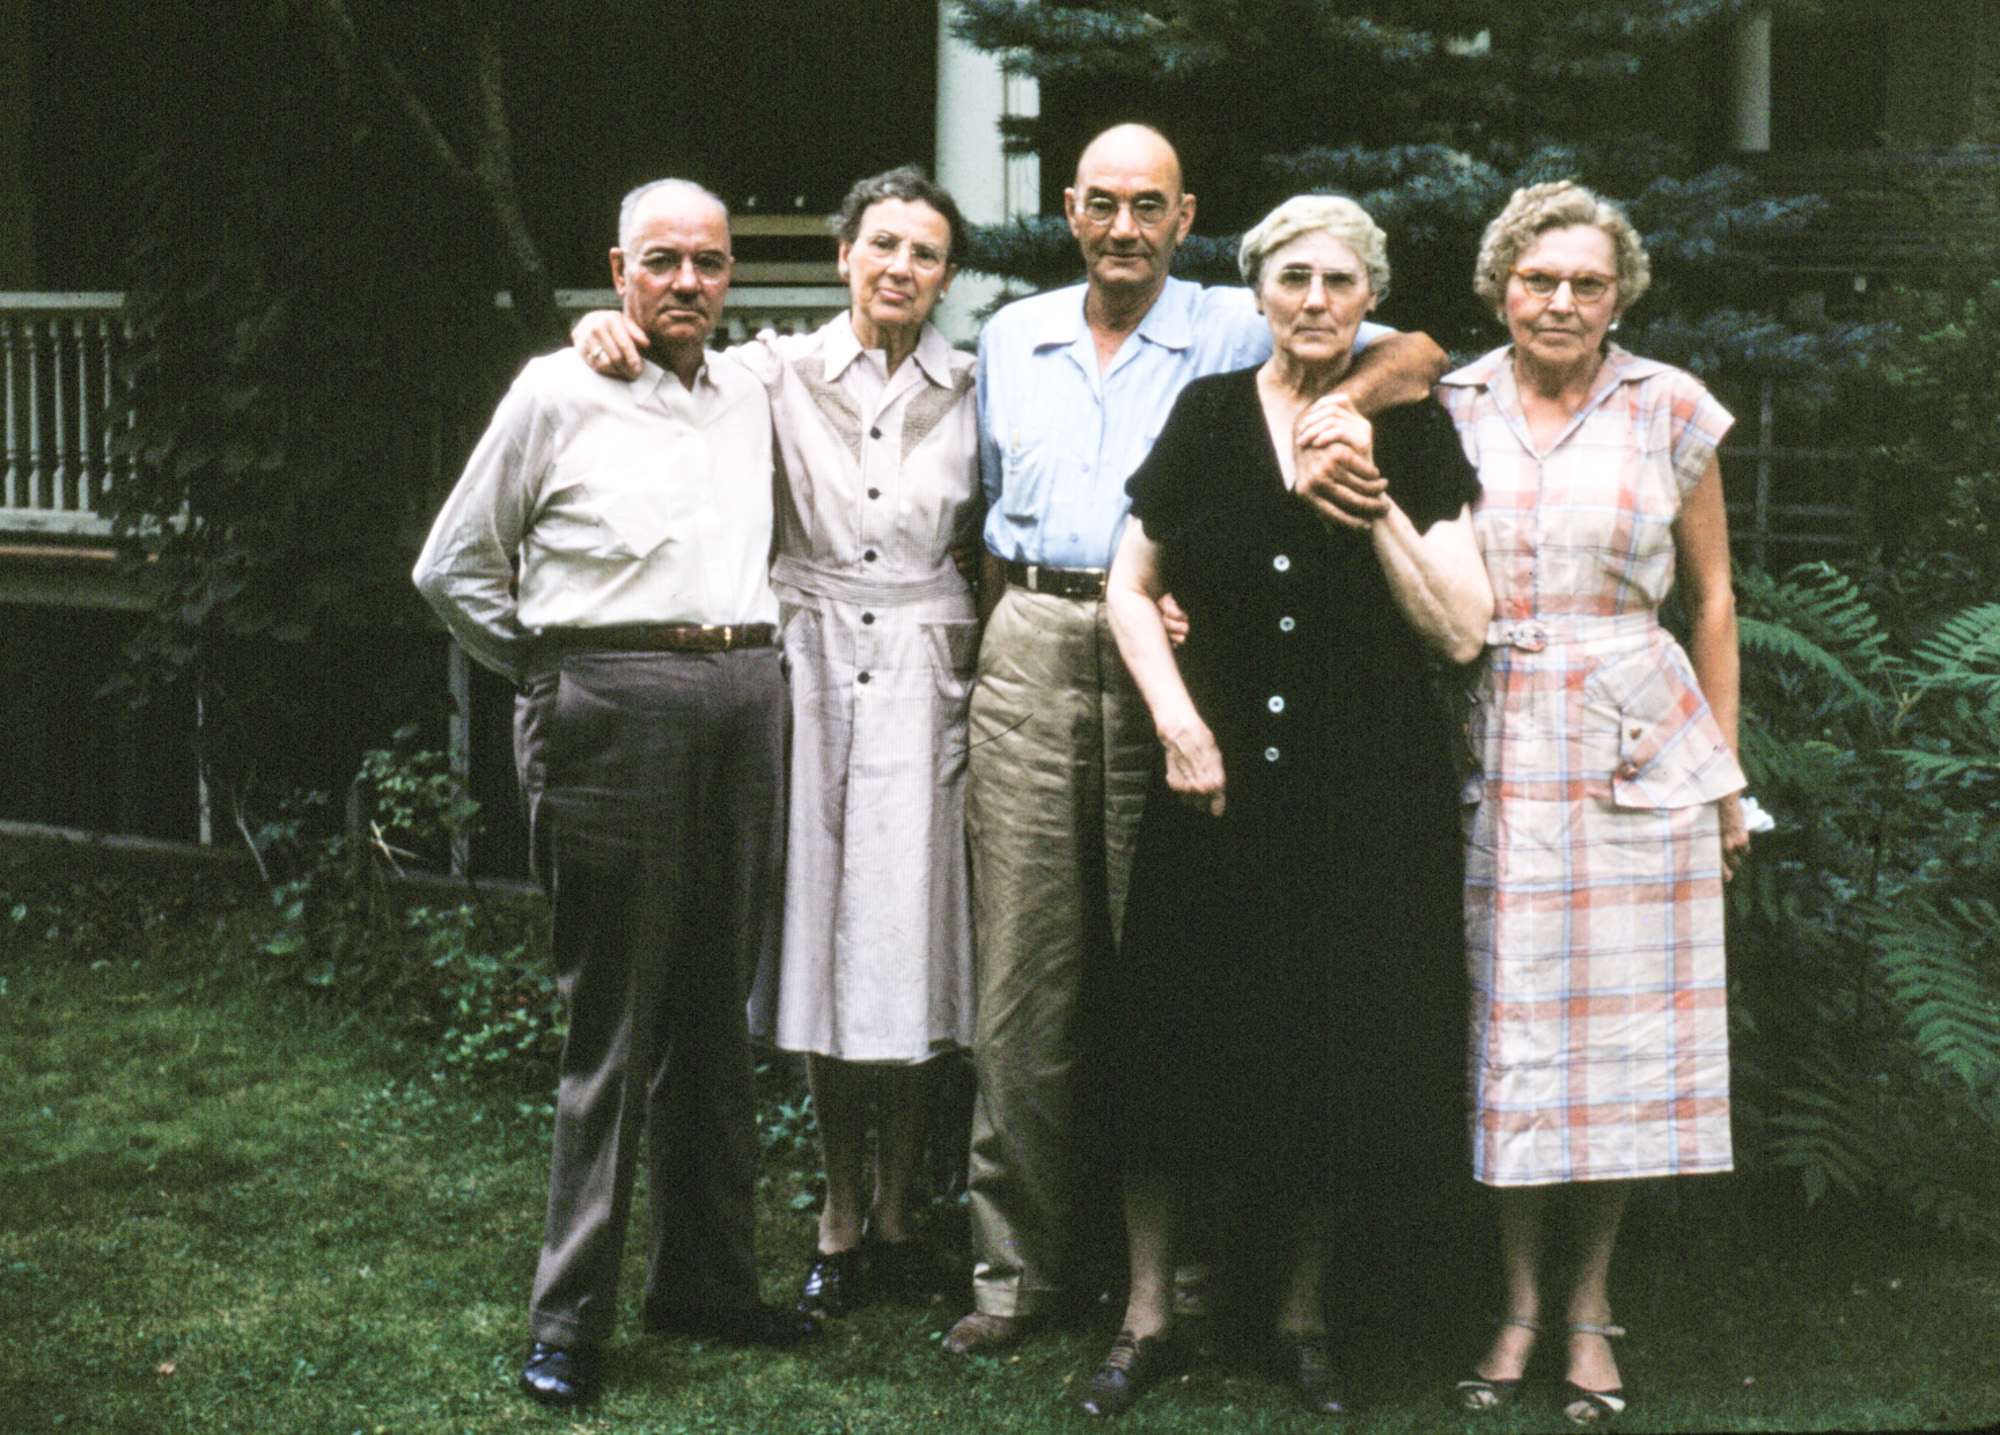 Dauth Family Archive - The Yeaton Siblings Reunion, Color Image